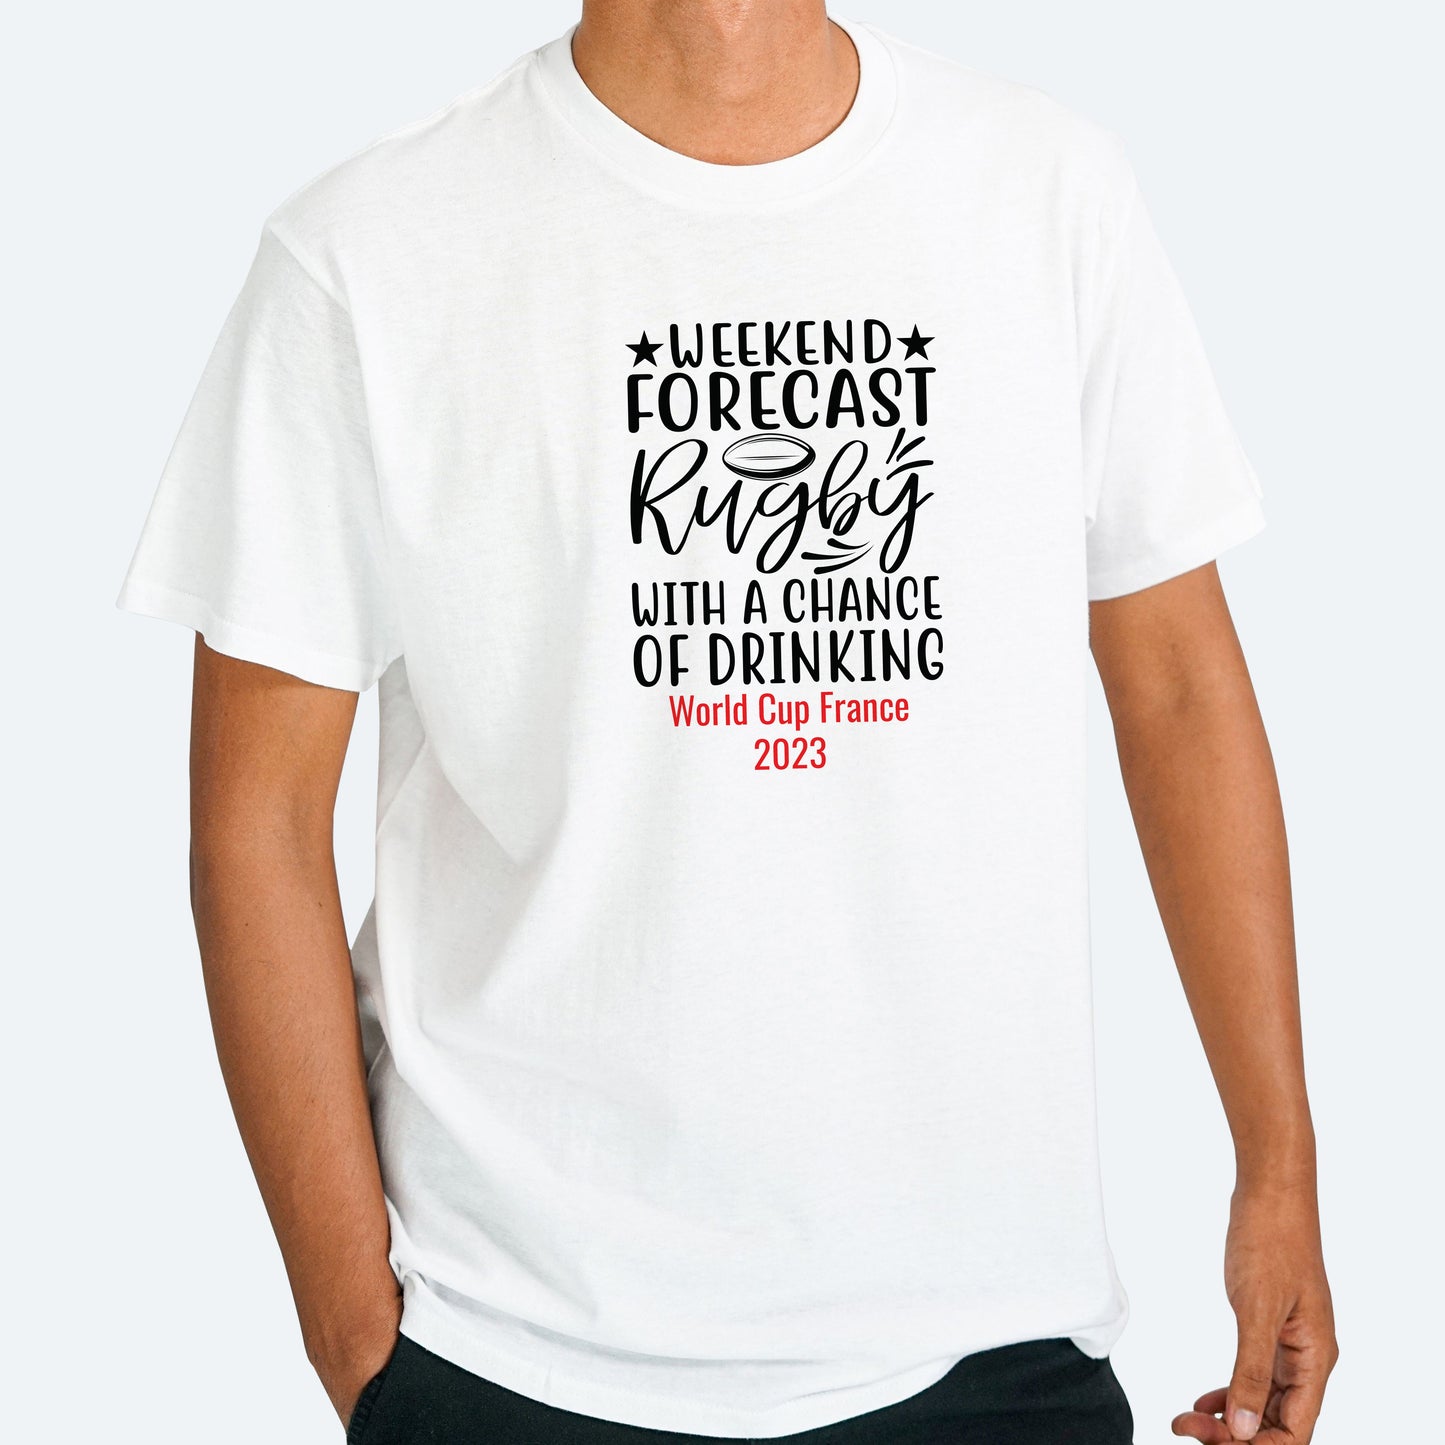 Rugby And Chance Of Drinking Tshirt